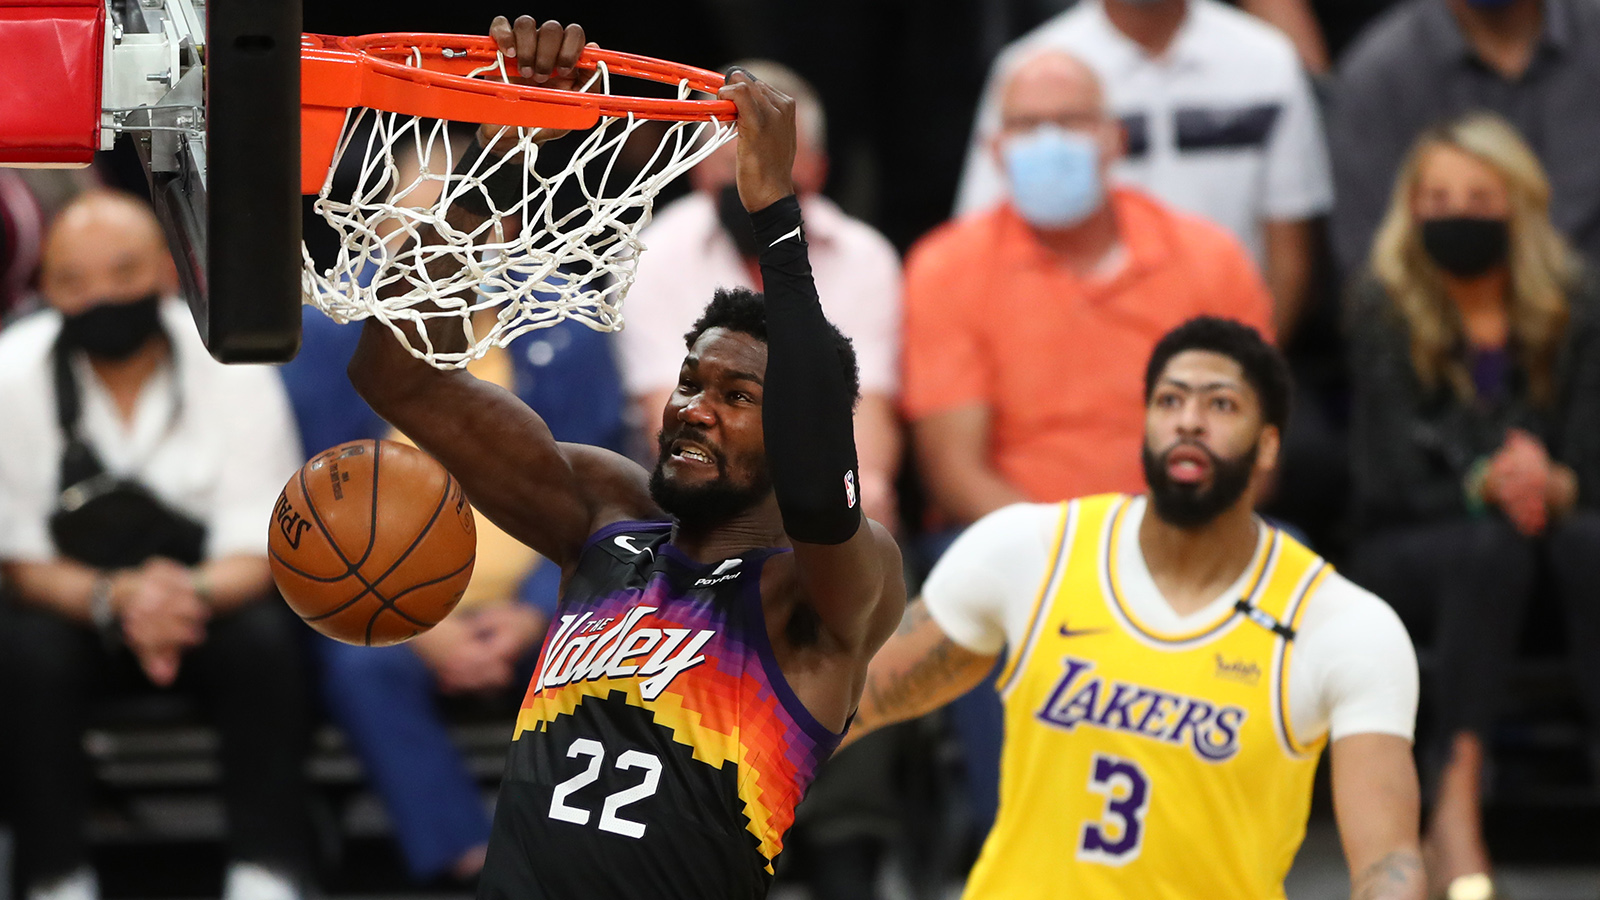 Deandre Ayton plays well, Suns beat another shorthanded Lakers squad